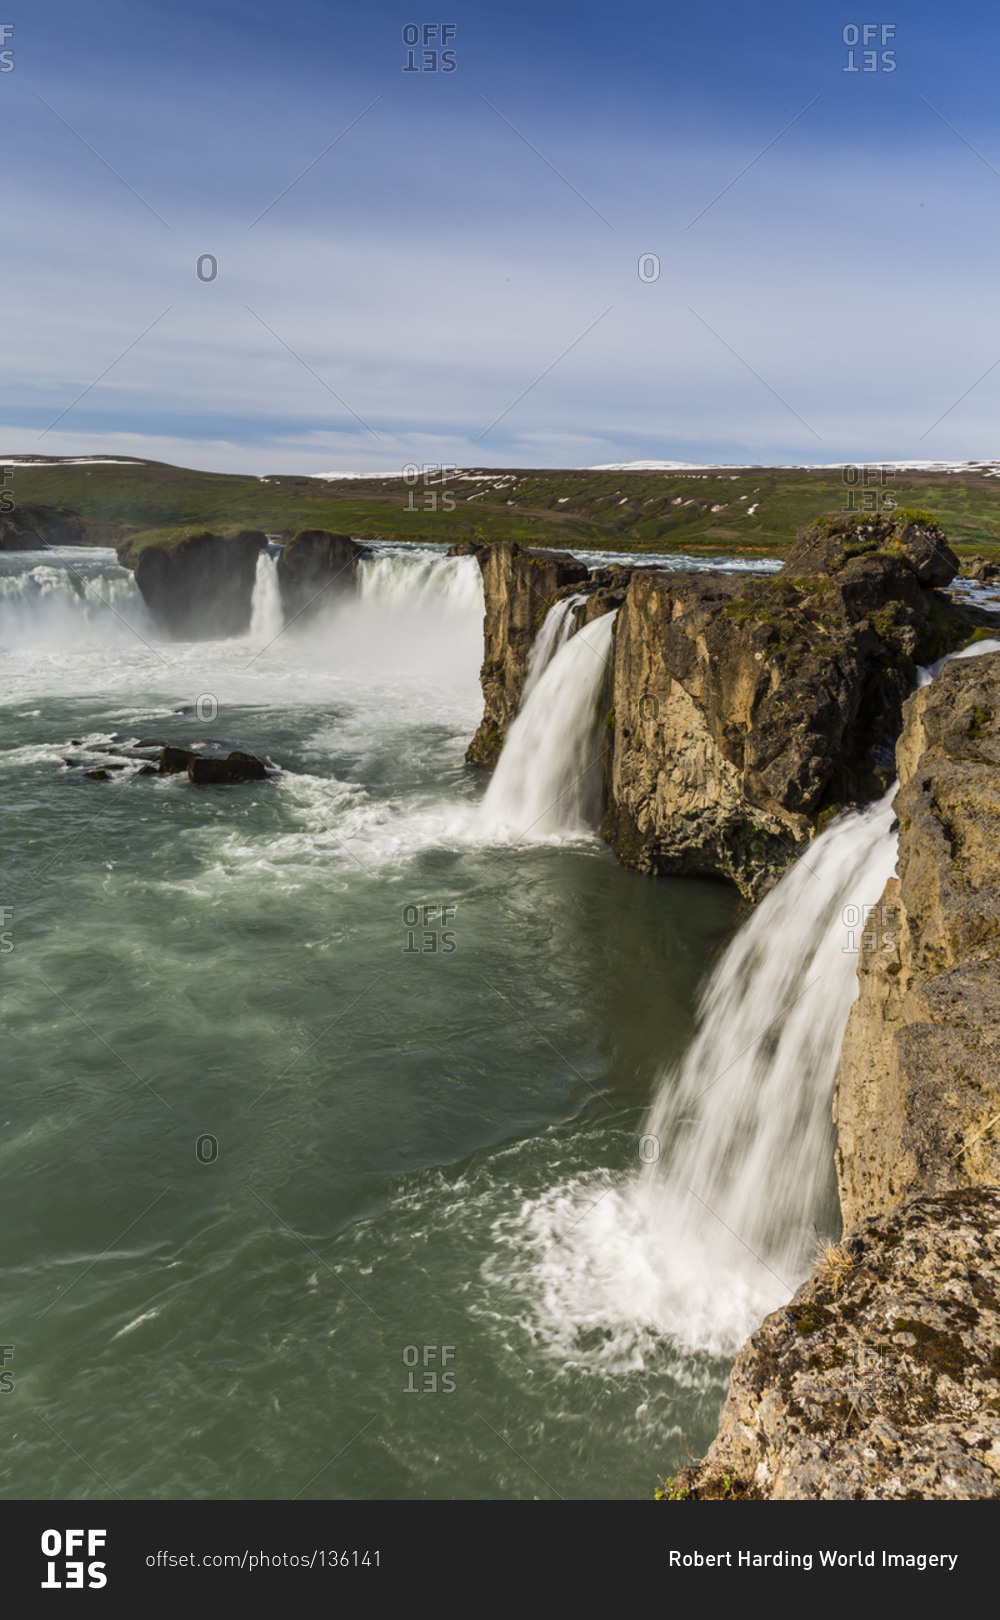 One of Iceland's most spectacular waterfalls